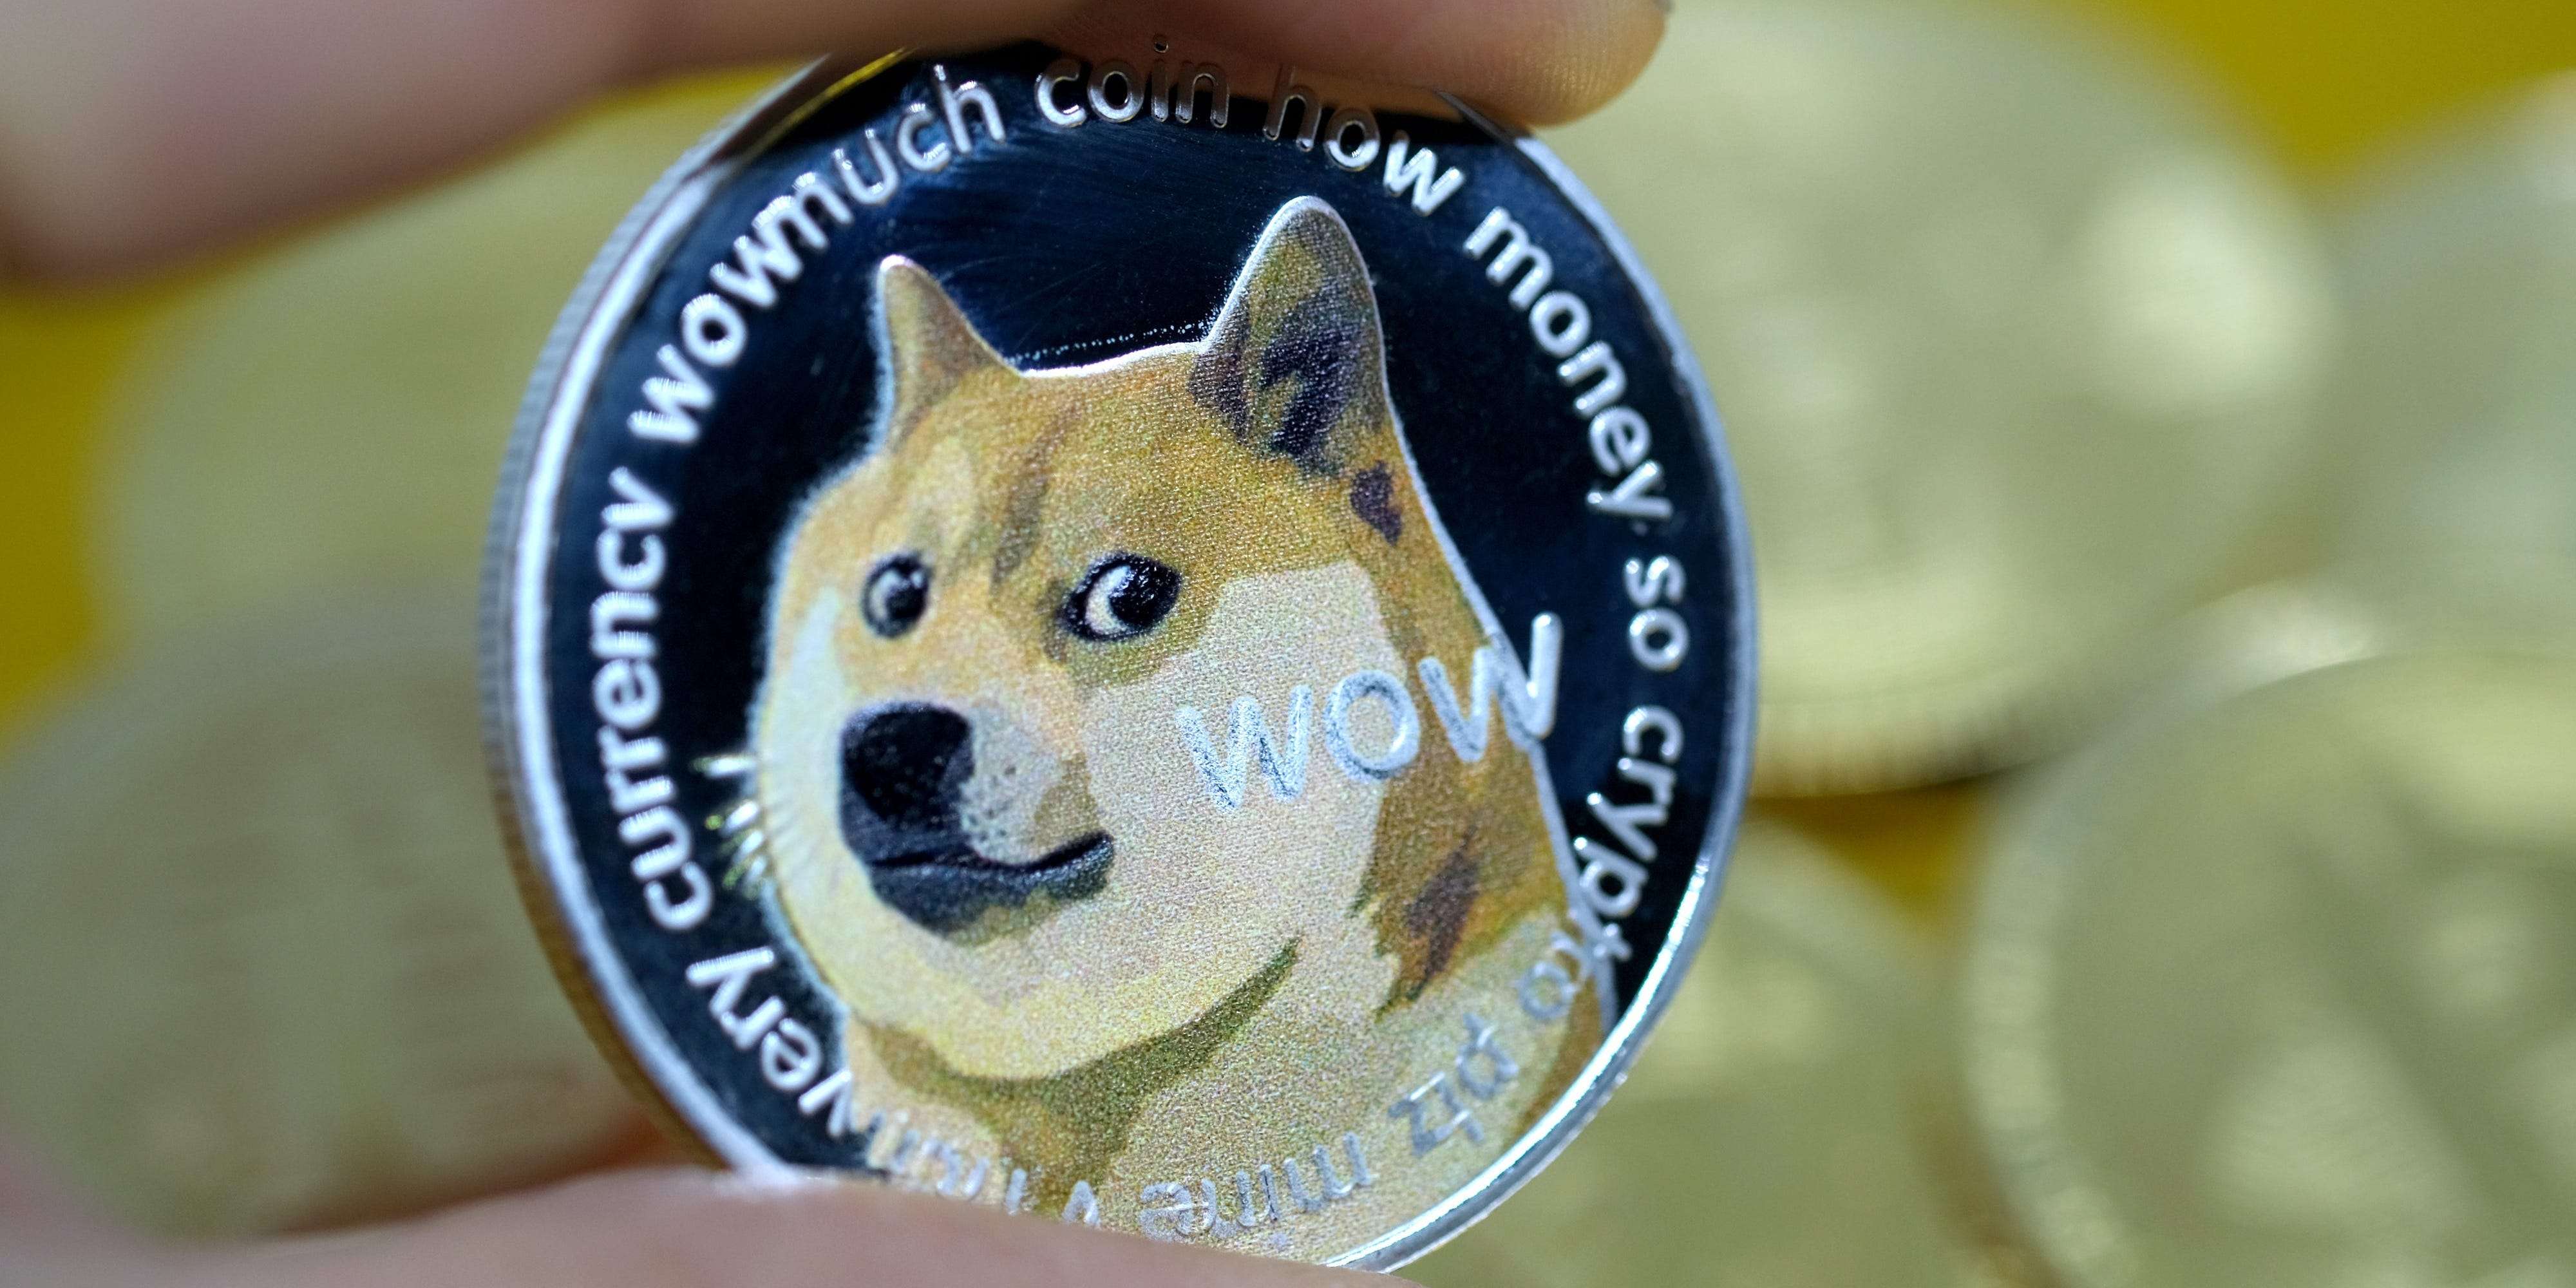 dogecoin top out